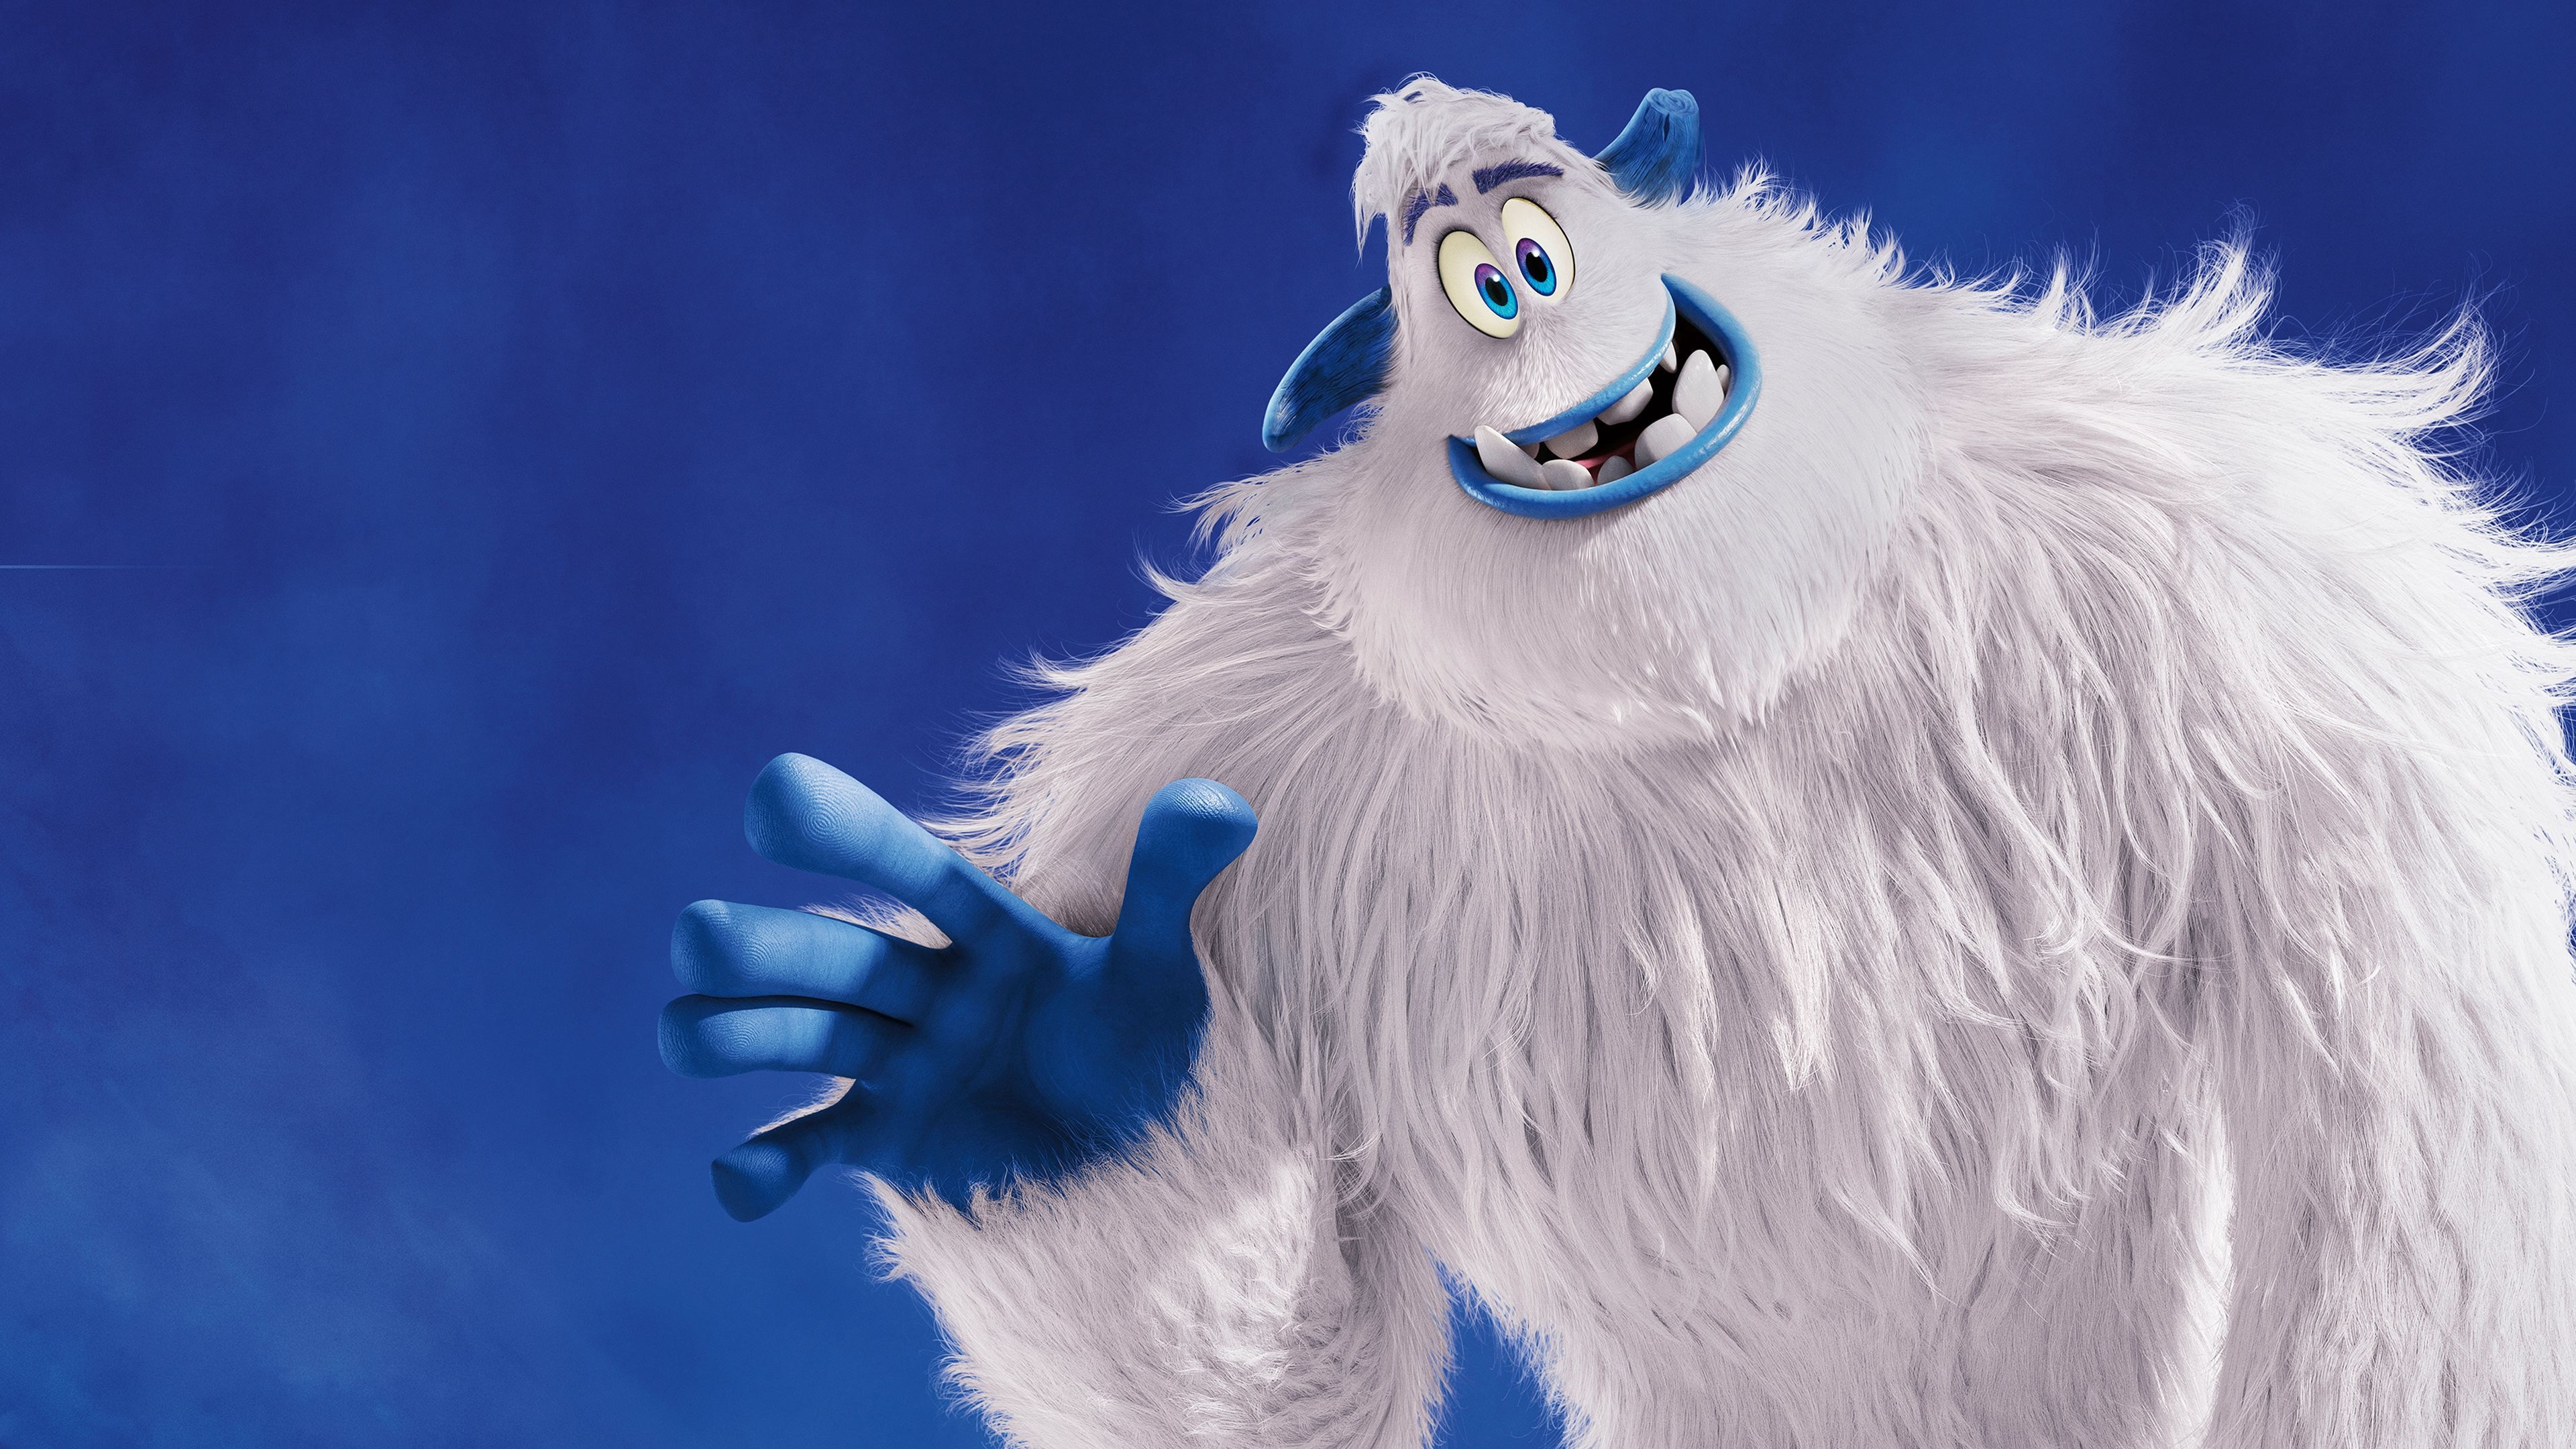 Smallfoot, Hilarious animated adventure, Mythical creatures, Friendship quest, 3840x2160 4K Desktop